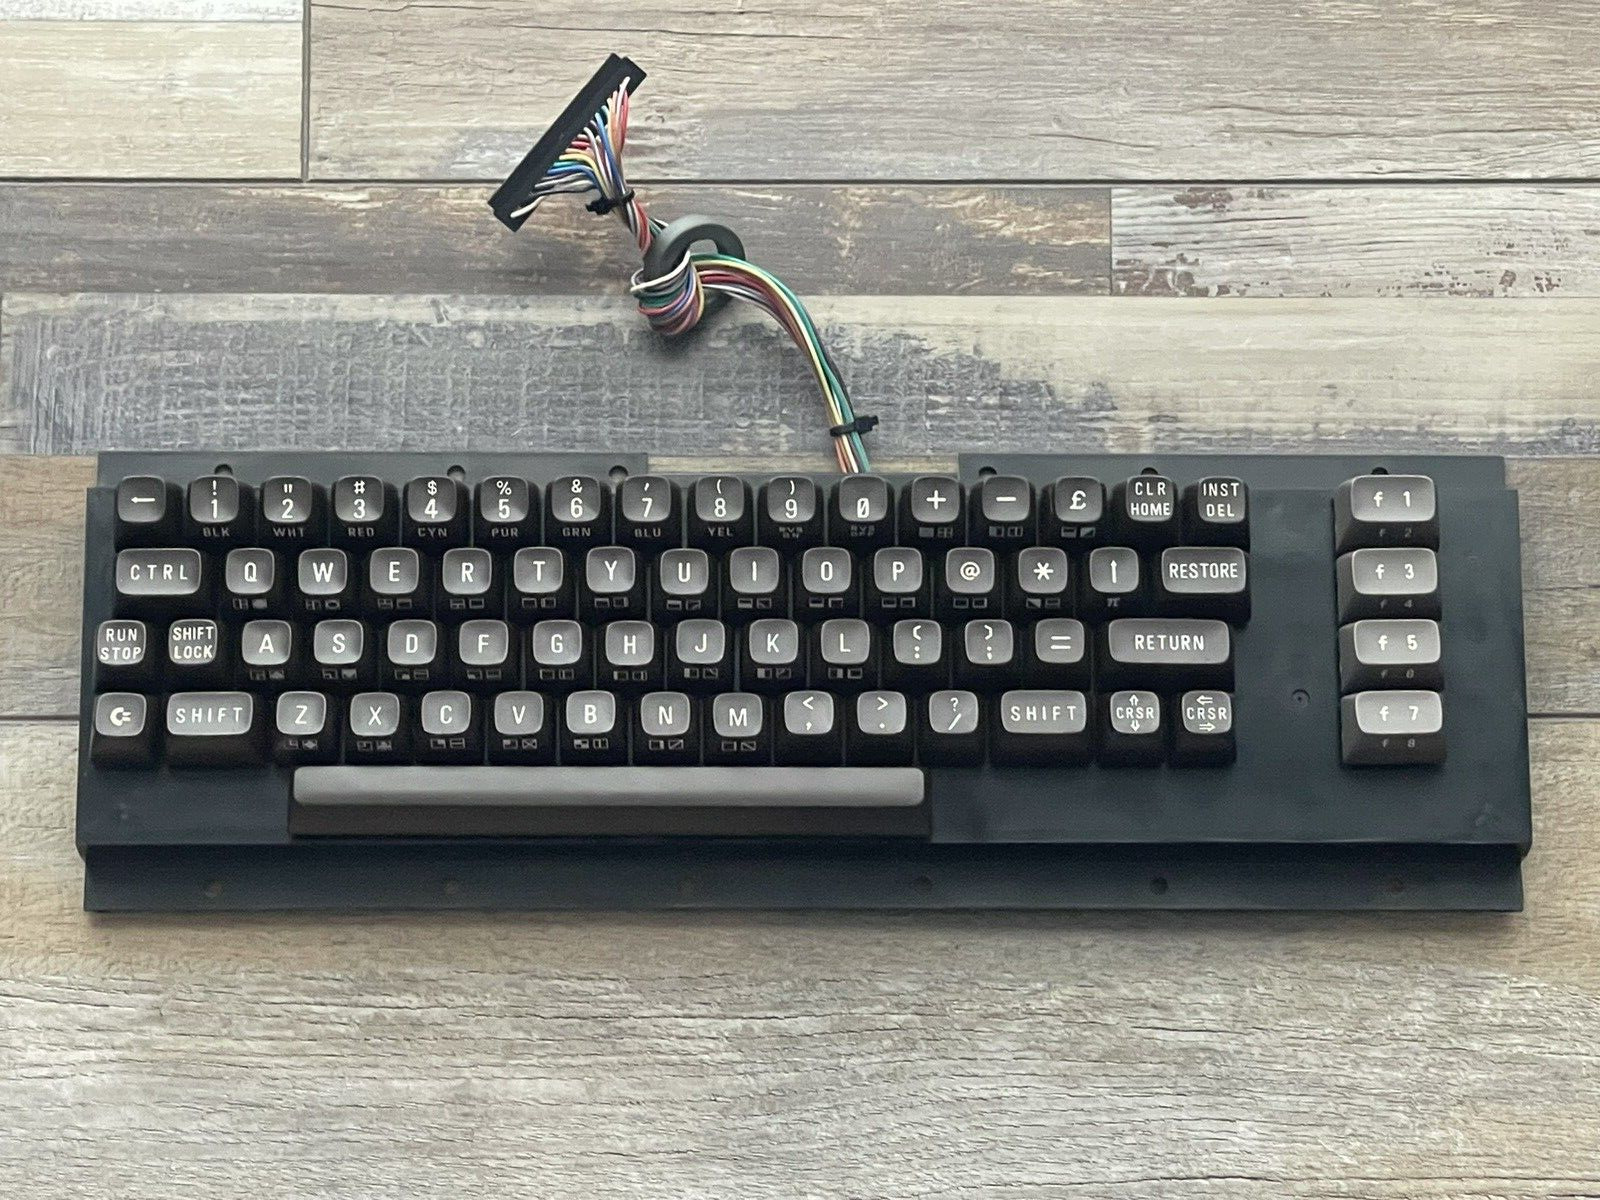 Professionally Refurbished Commodore 64 / VIC 20 Keyboard - Cleaned & Working